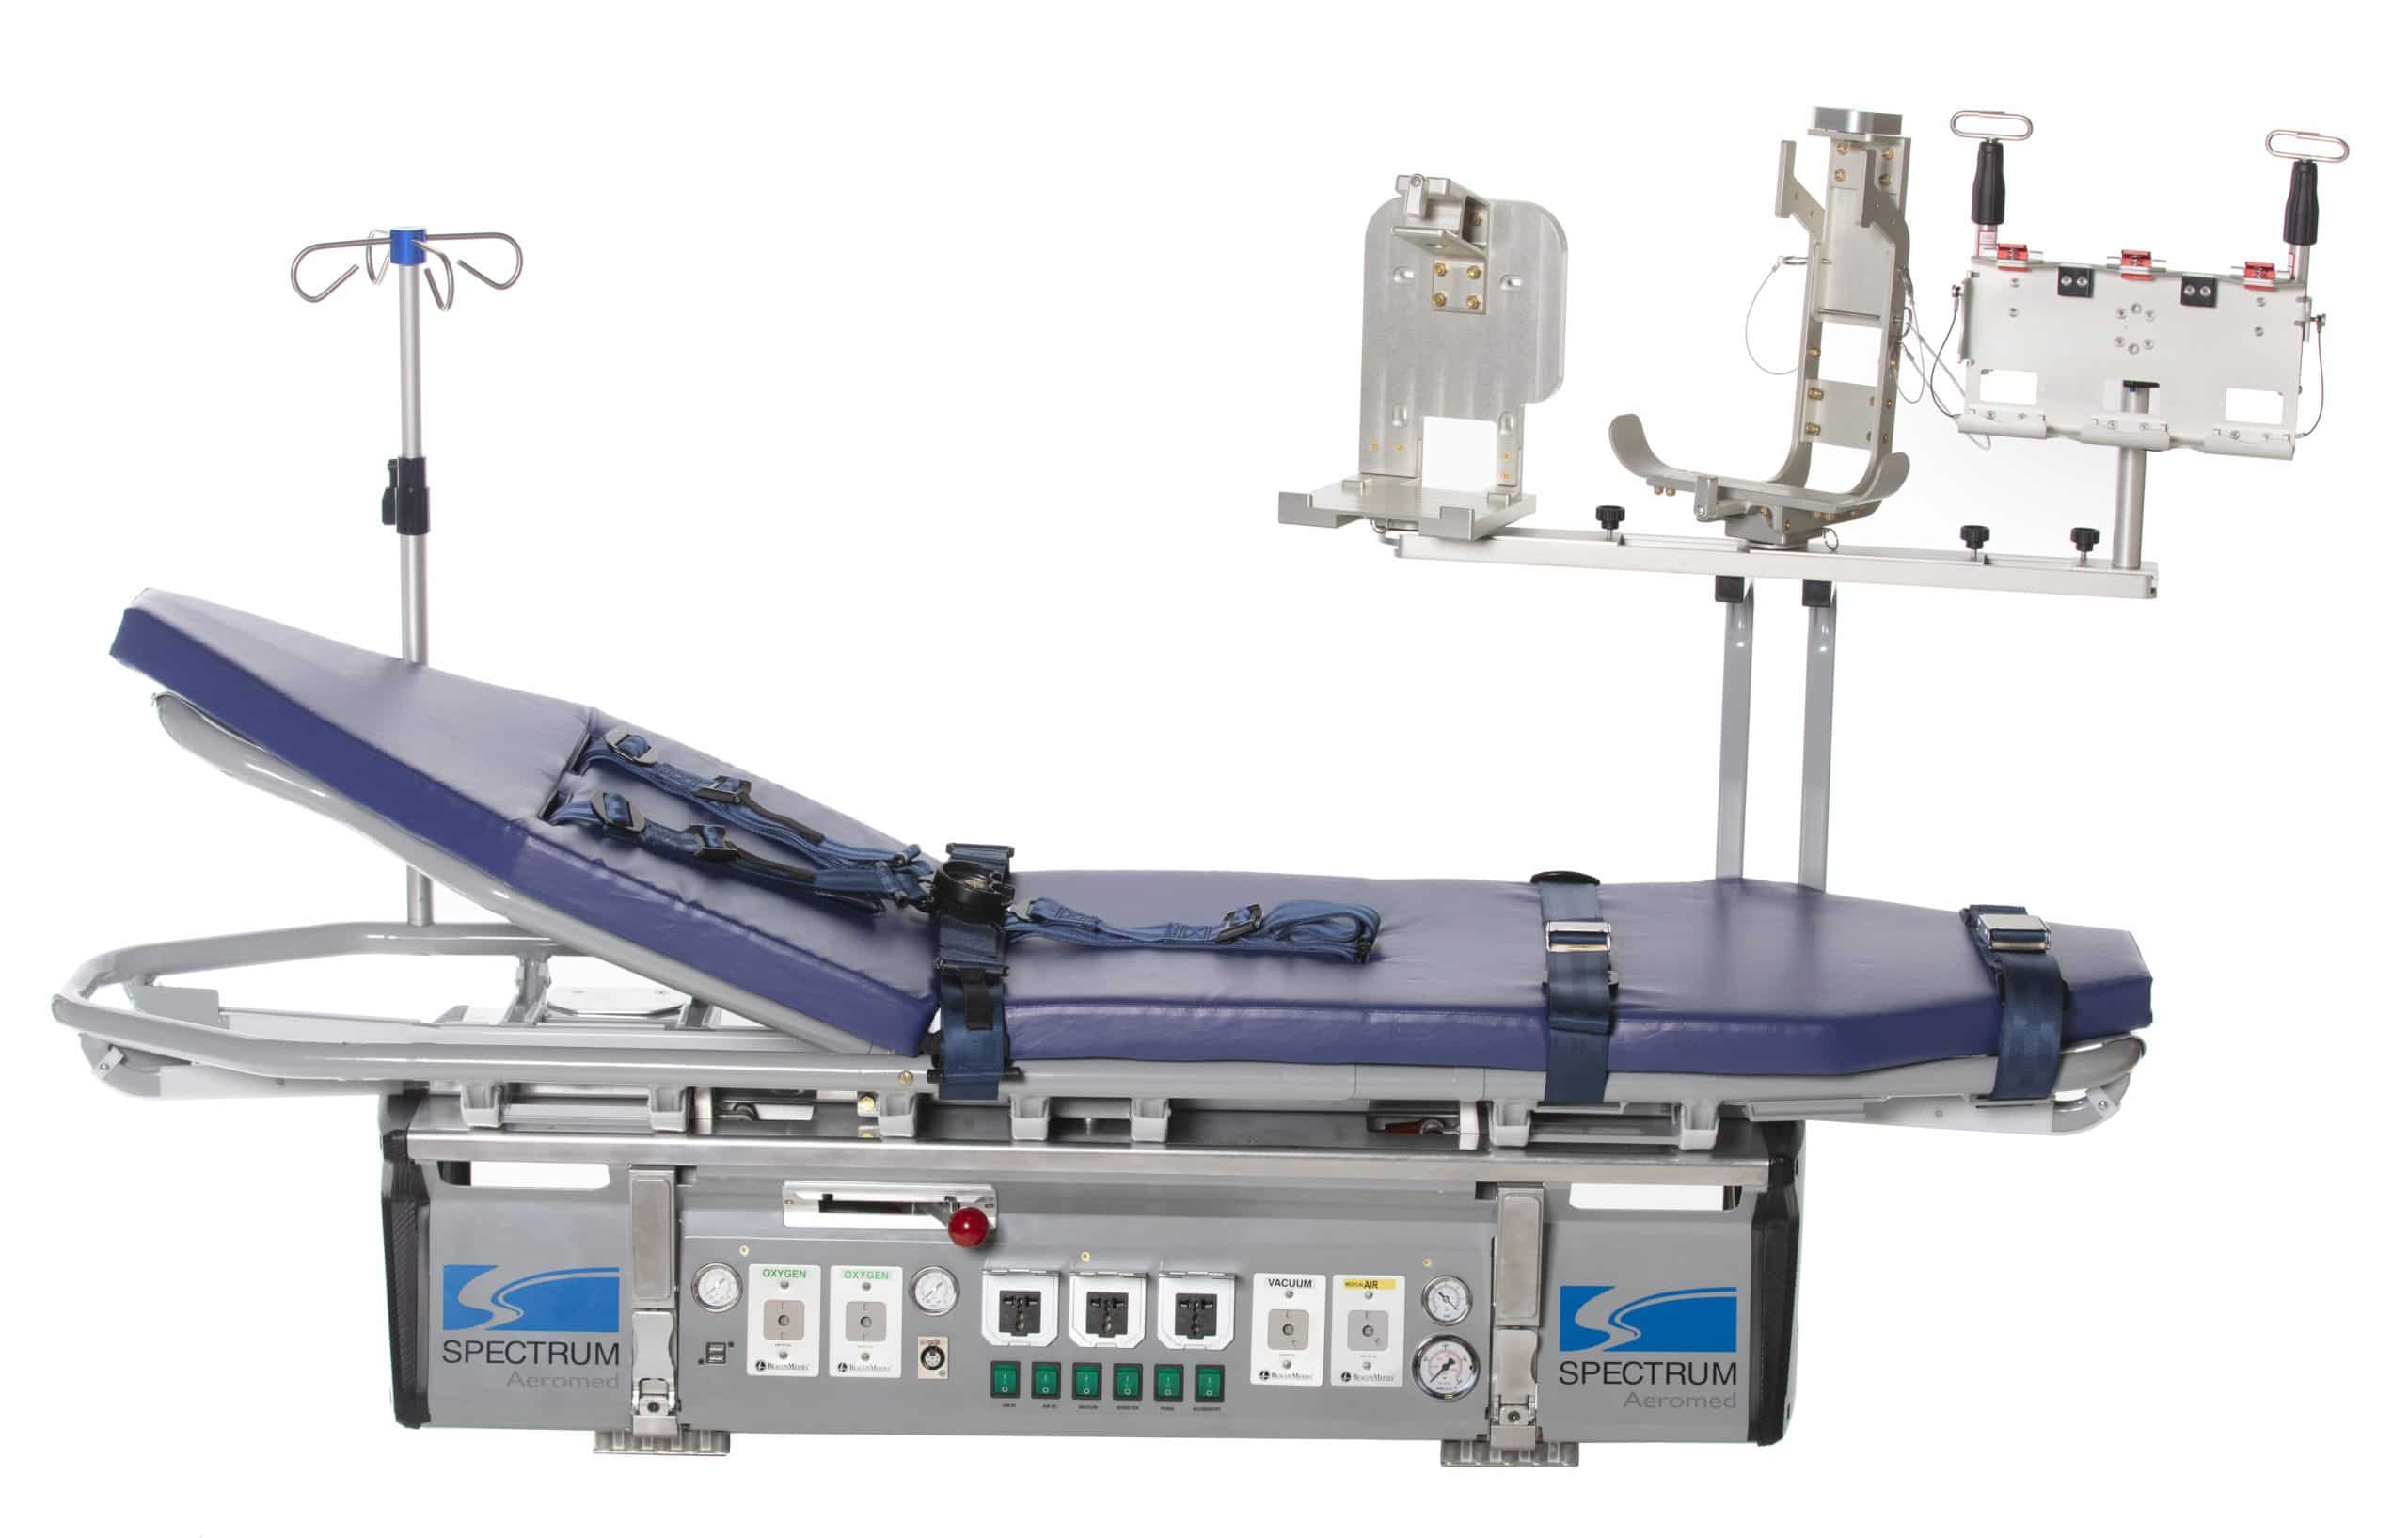 Isolated front view of the Infinity 5000X with IV pole and equipment storage